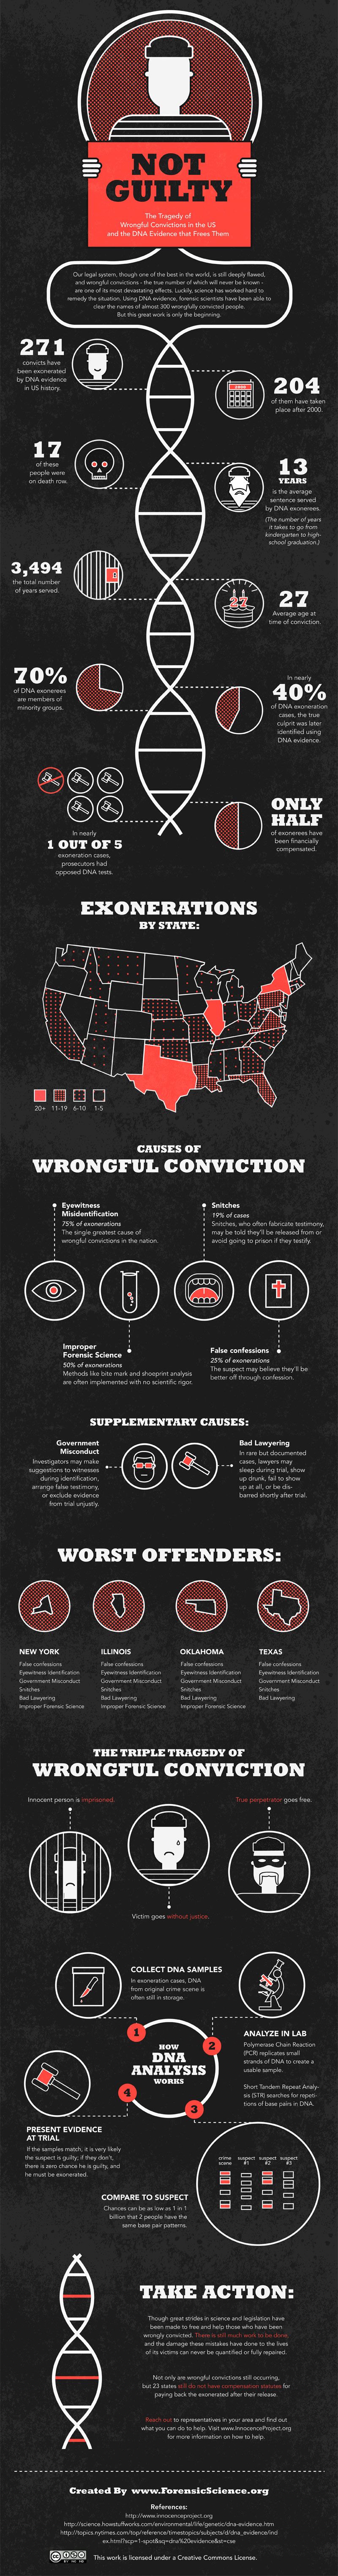 Not Guilty: The Tragedy of Wrongful Convictions in the US